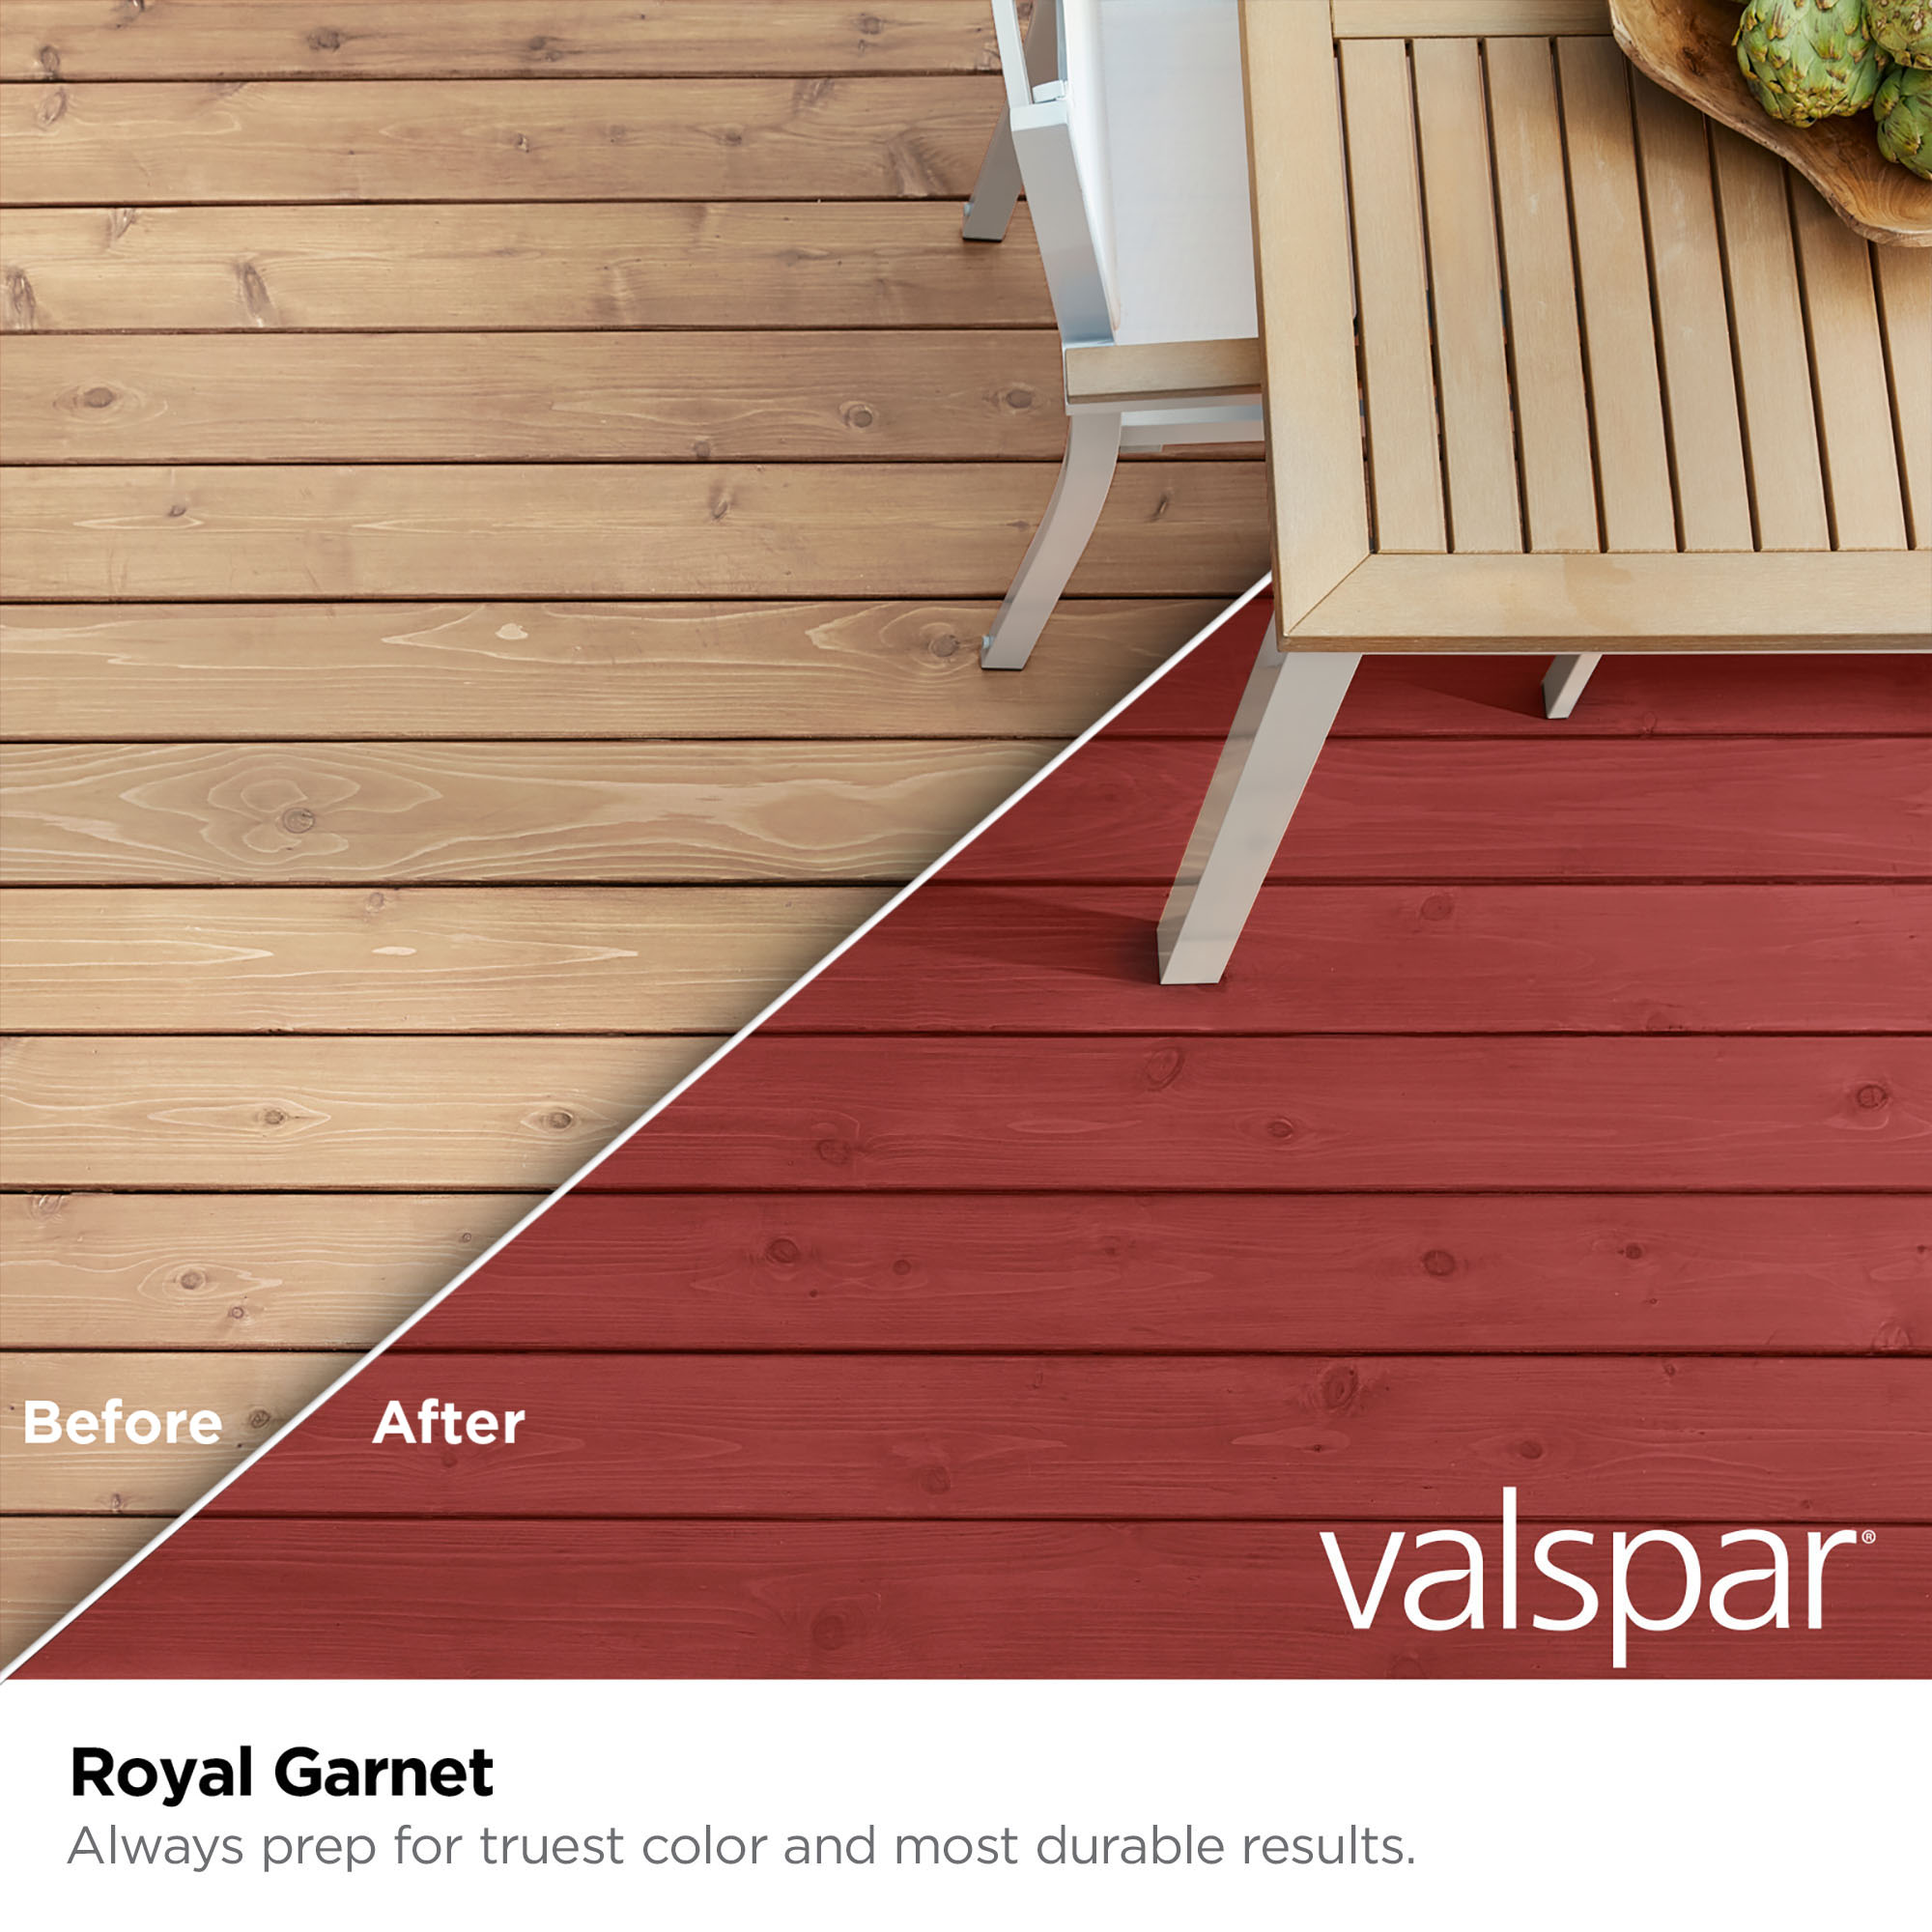 Valspar Smoky Pitch Semi-transparent Exterior Wood Stain and Sealer  (1-Gallon) in the Exterior Stains department at